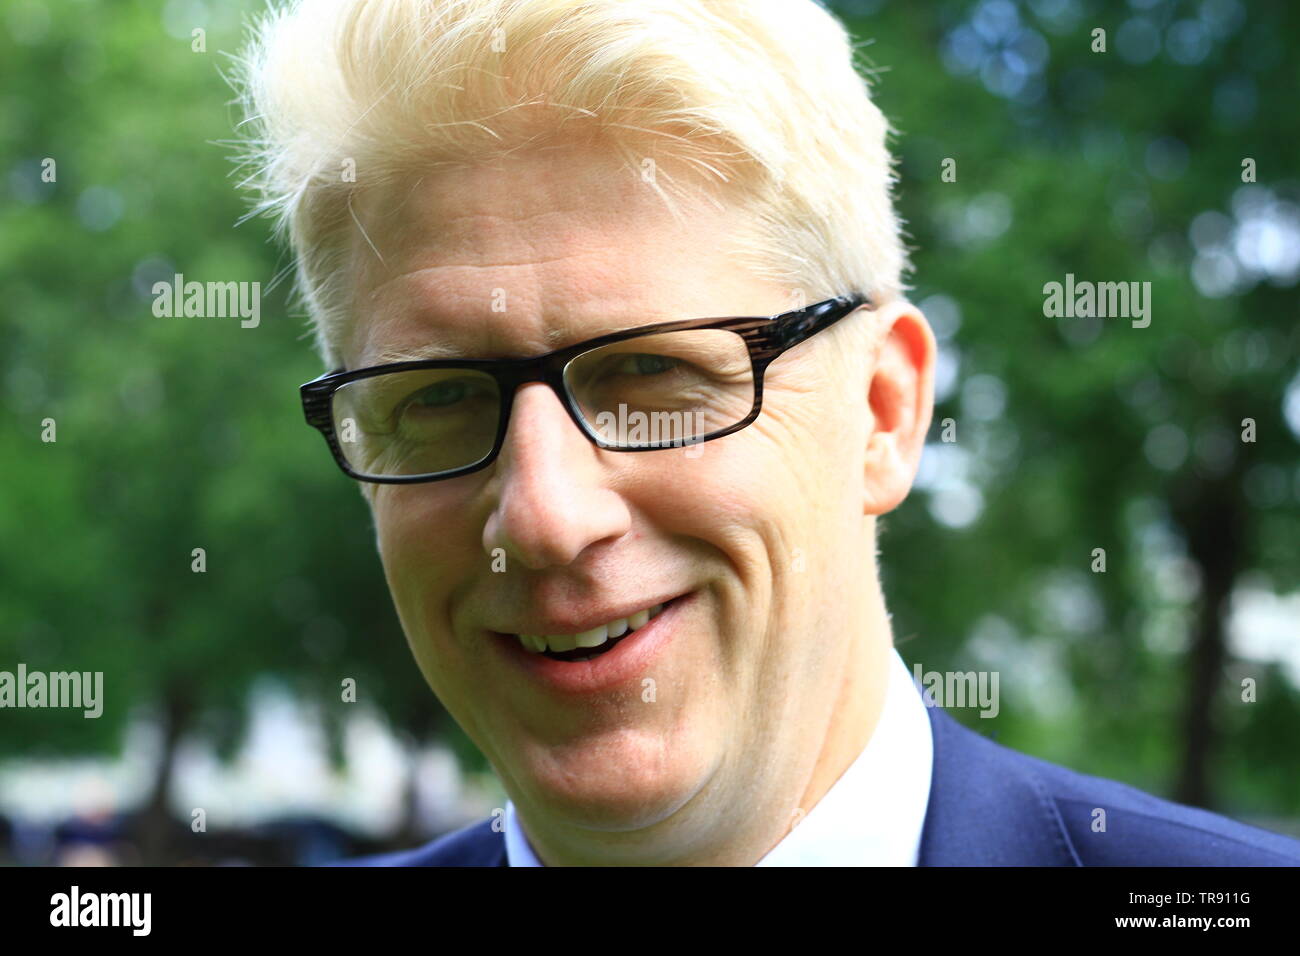 JO JOHNSON MP IN WESTMINSTER ON 30TH OF MAY 2019. BRITISH POLITICIANS. POLITICS. POLITICING. UK. POLITICS. RUSSELL MOORE PORTFOLIO PAGE. Stock Photo